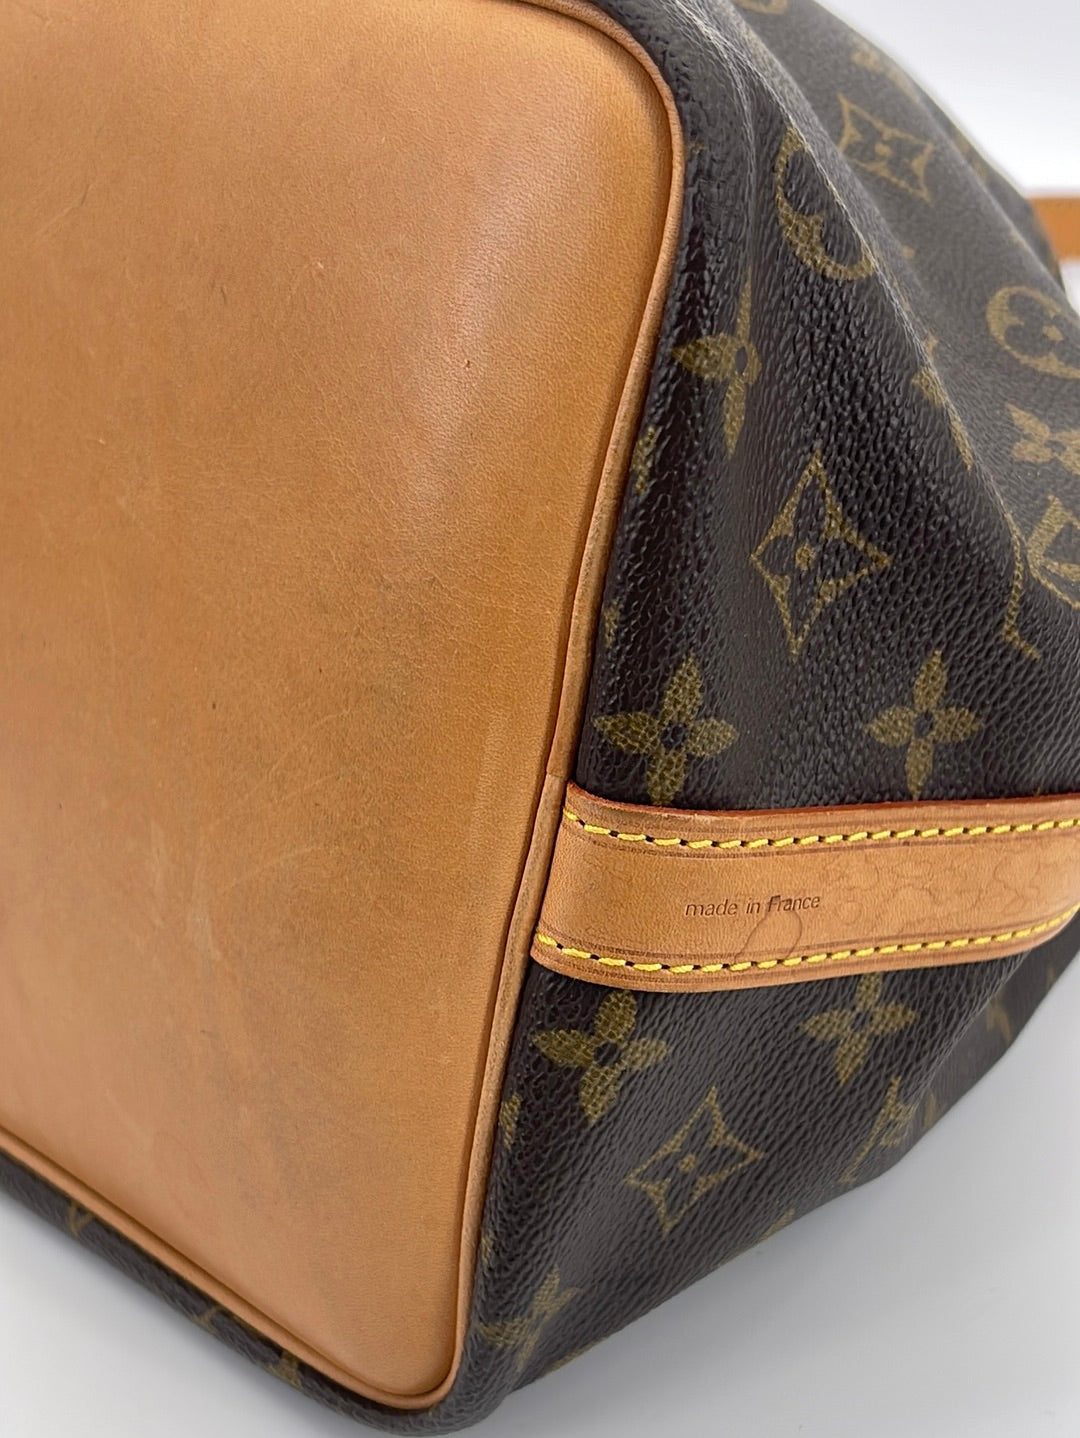 Sold at Auction: Louis Vuitton Noe PM Shoulder Bag, in a brown monogram  coated canvas, with vachetta leather accents and golden brass hardware,  with